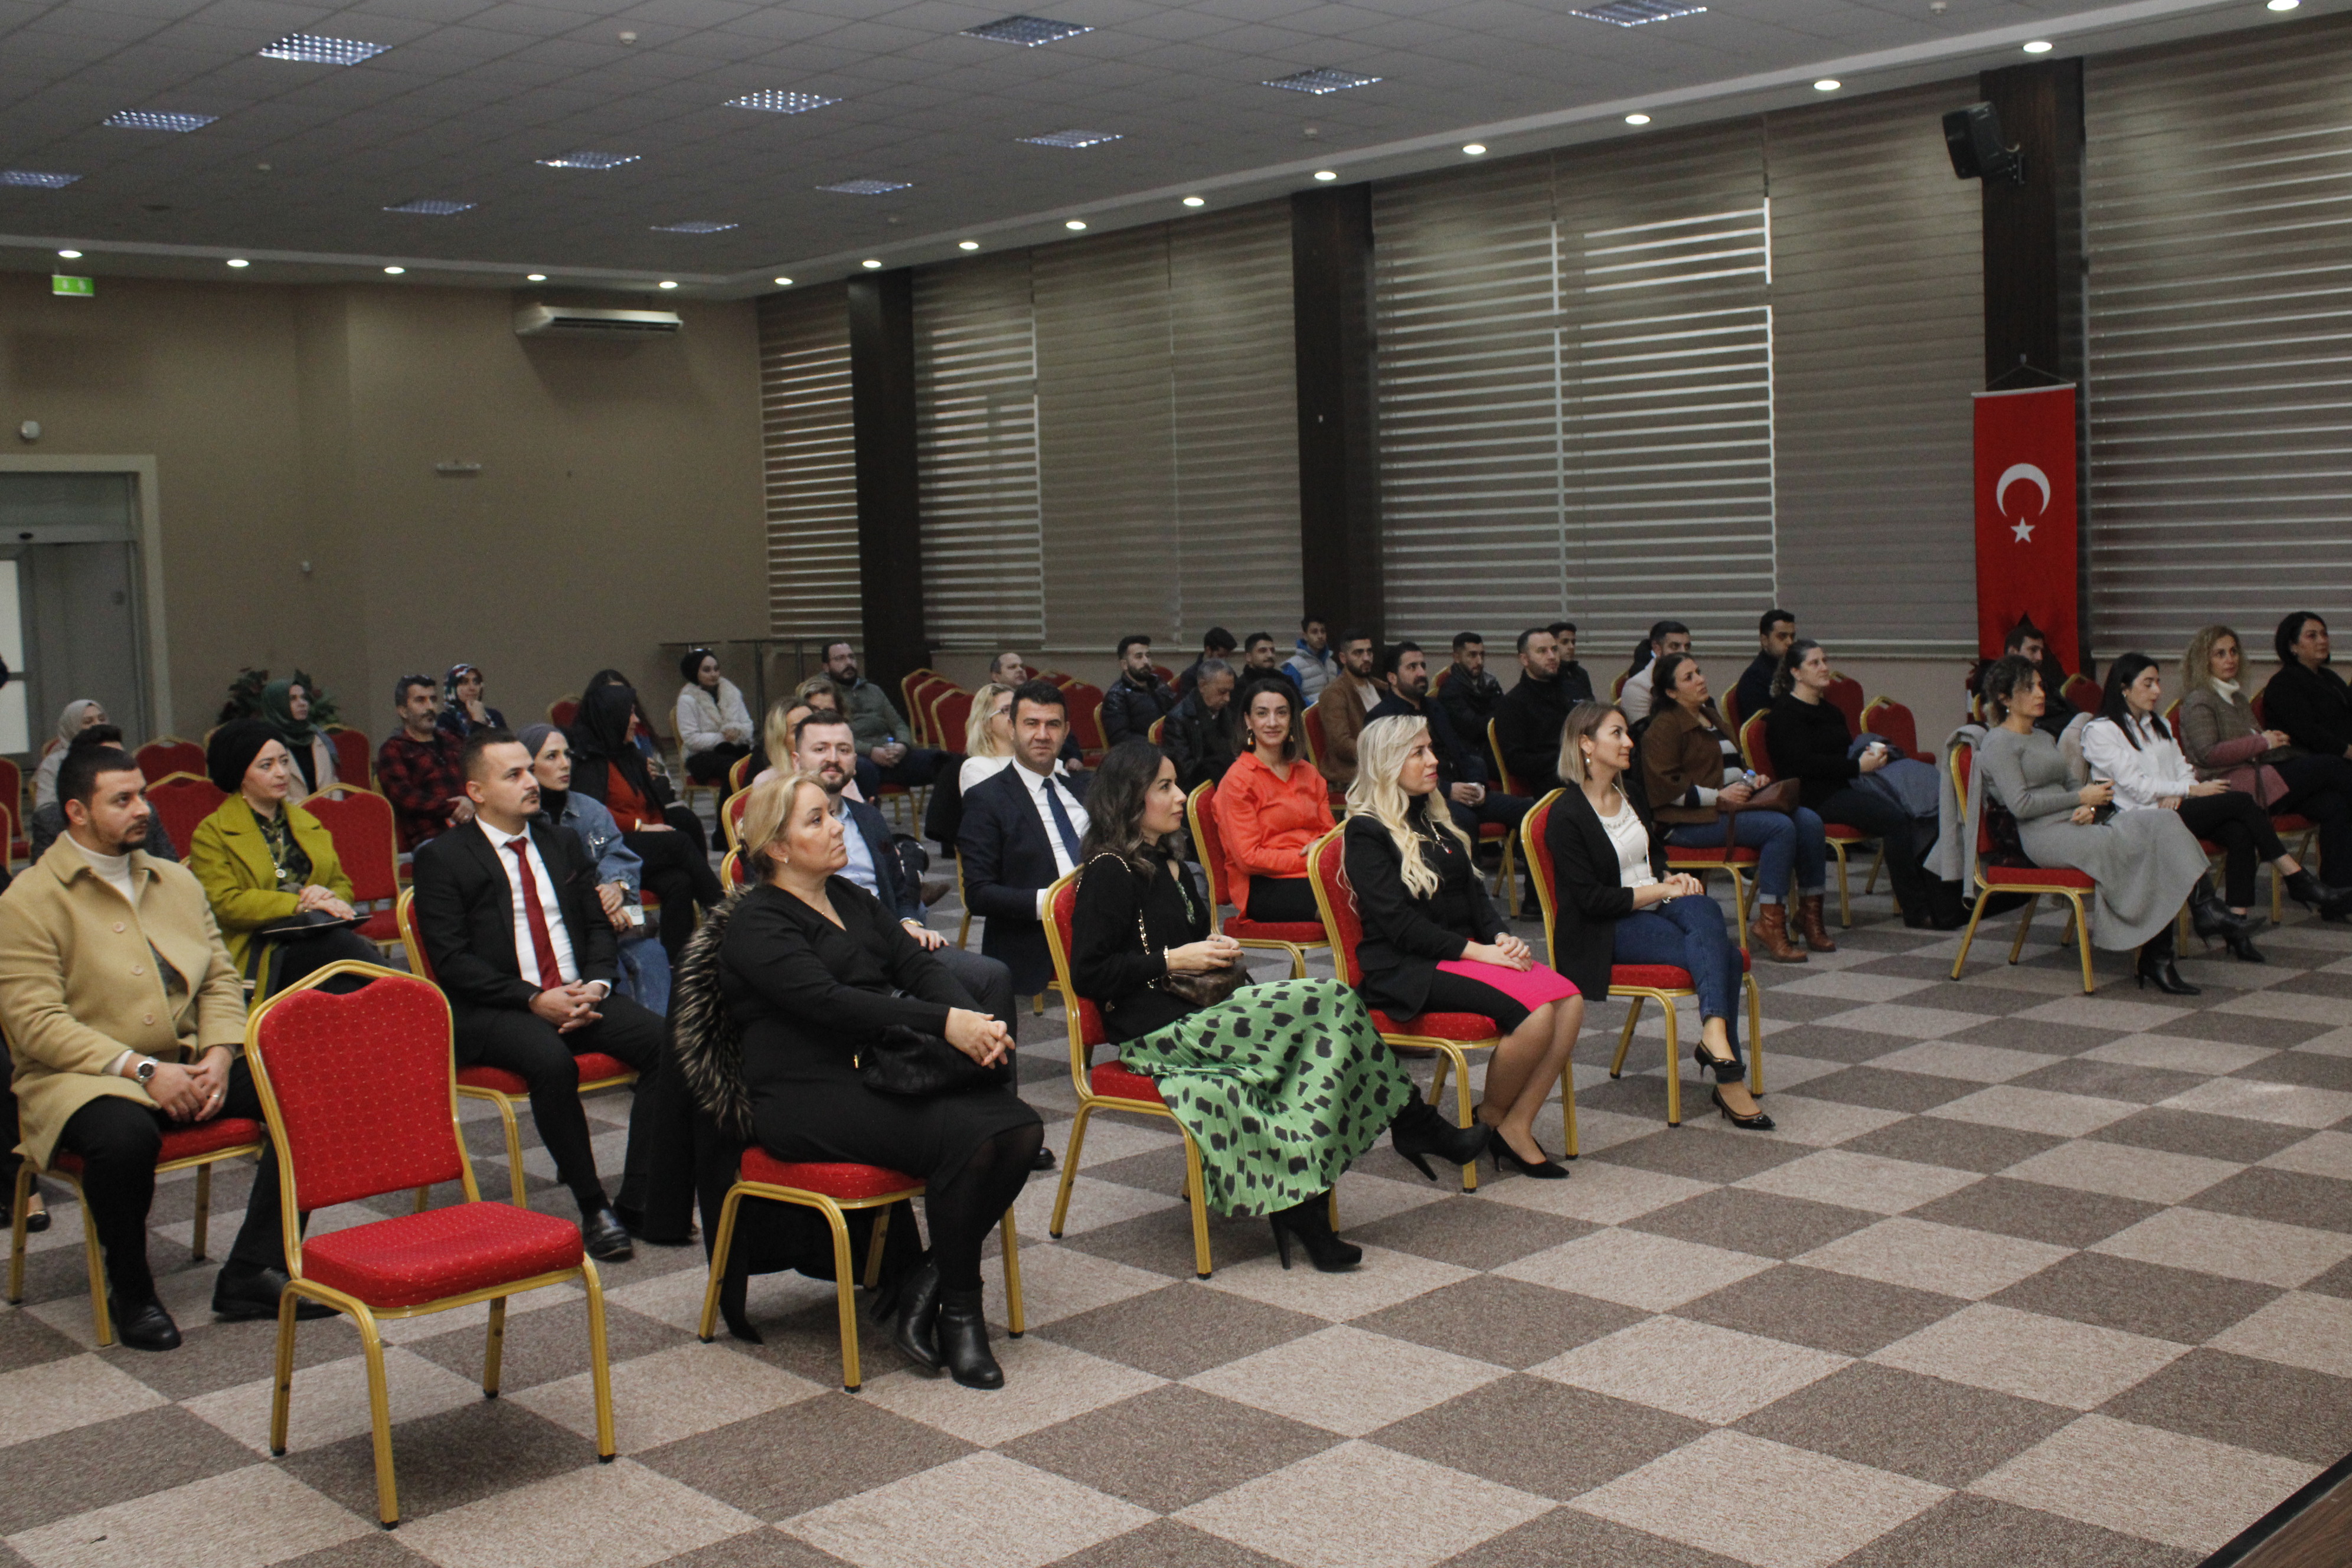 ANGRY AND STRESS MANAGEMENT TRAINING FROM THE KÖRFEZ CHAMBER OF COMMERCE